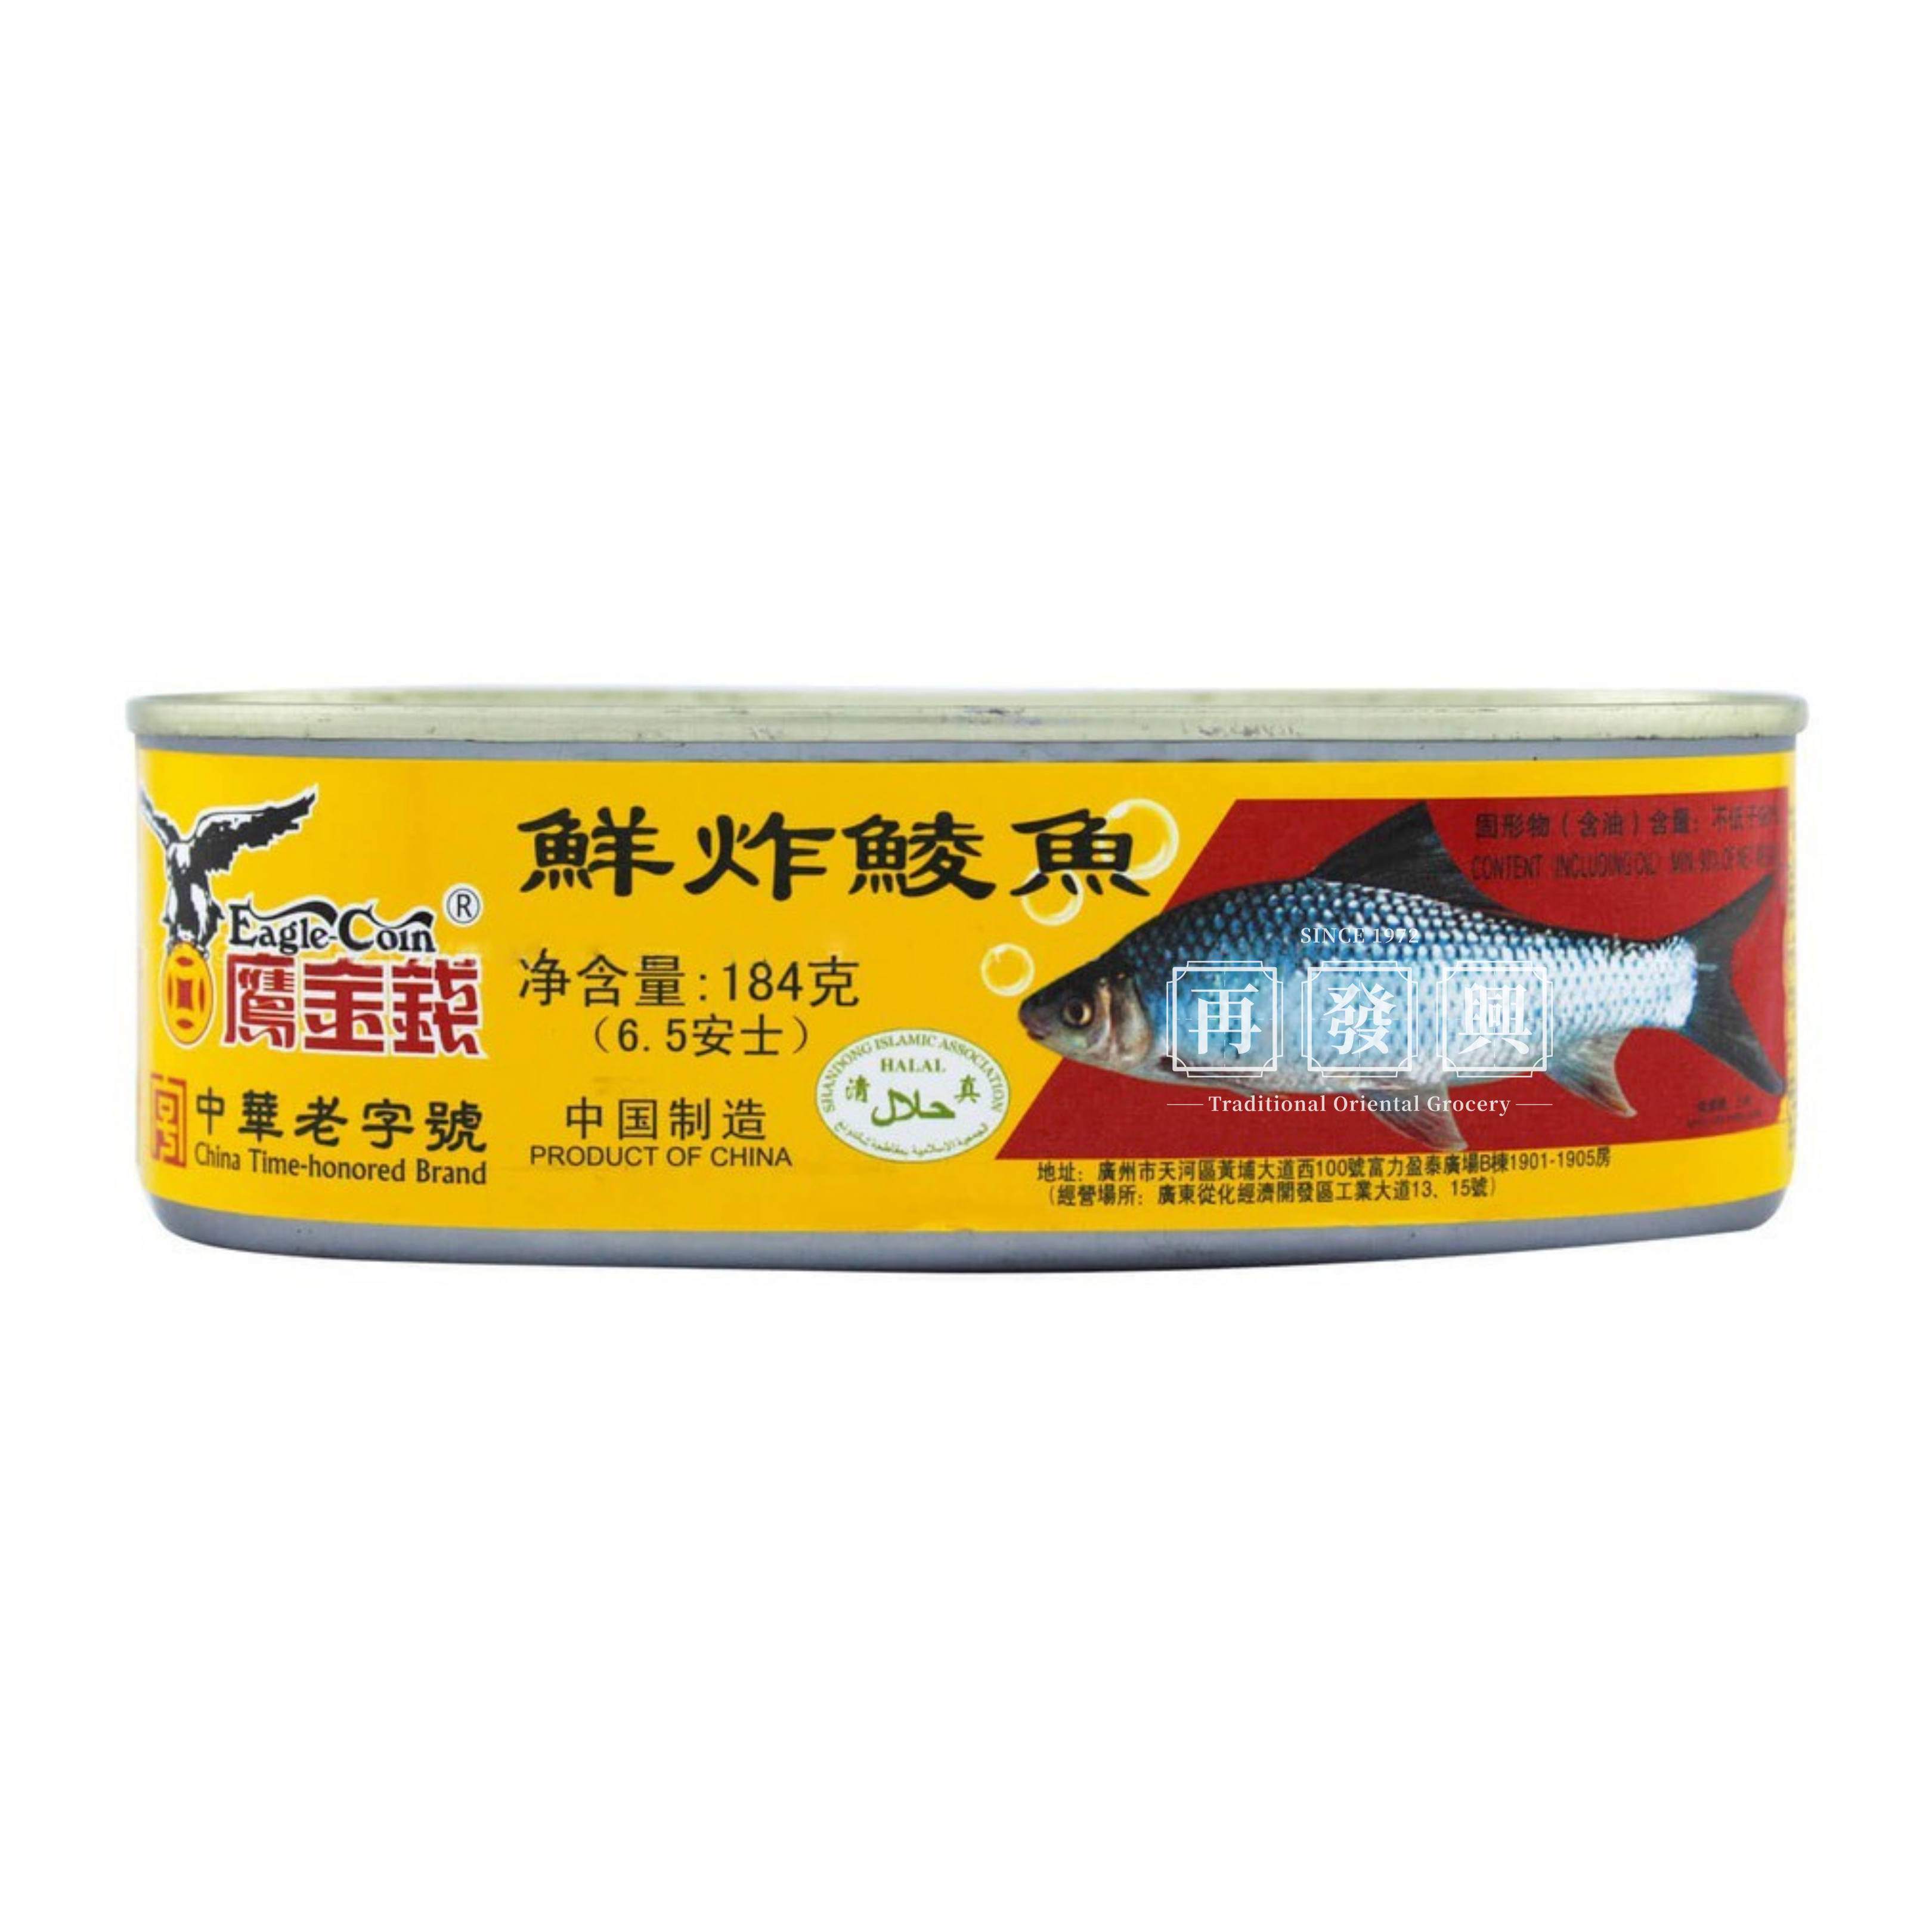 Eagle Coin Fried Dace Fish 184g